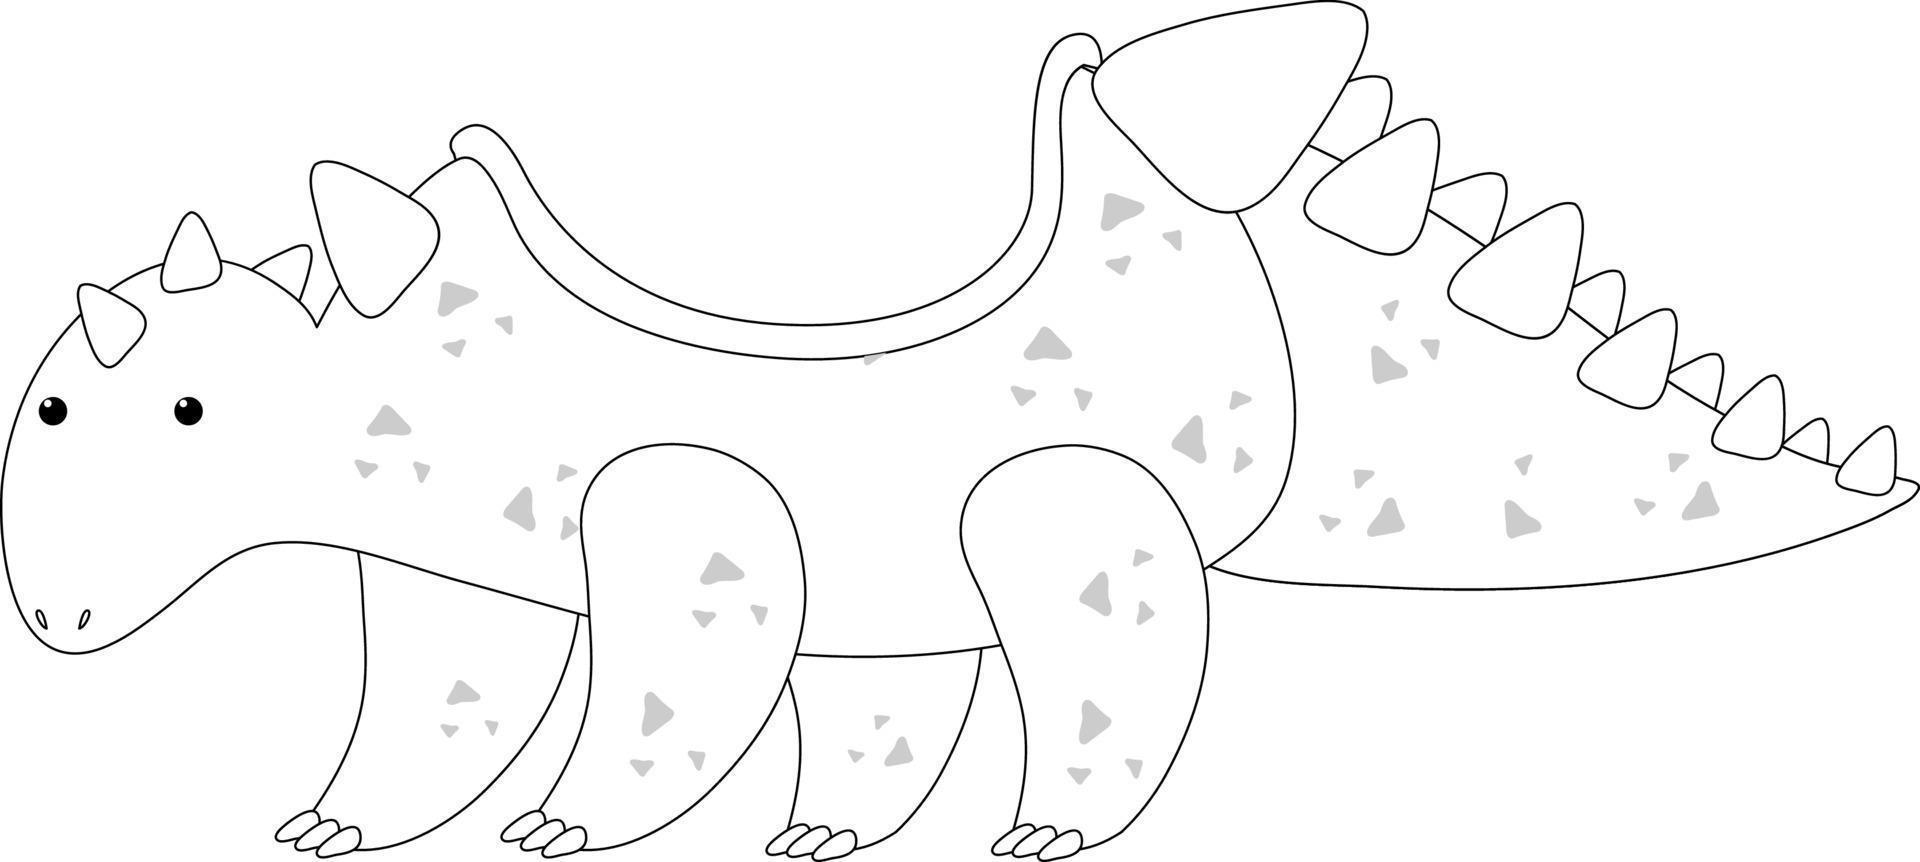 Dinosaur car black and white doodle character vector